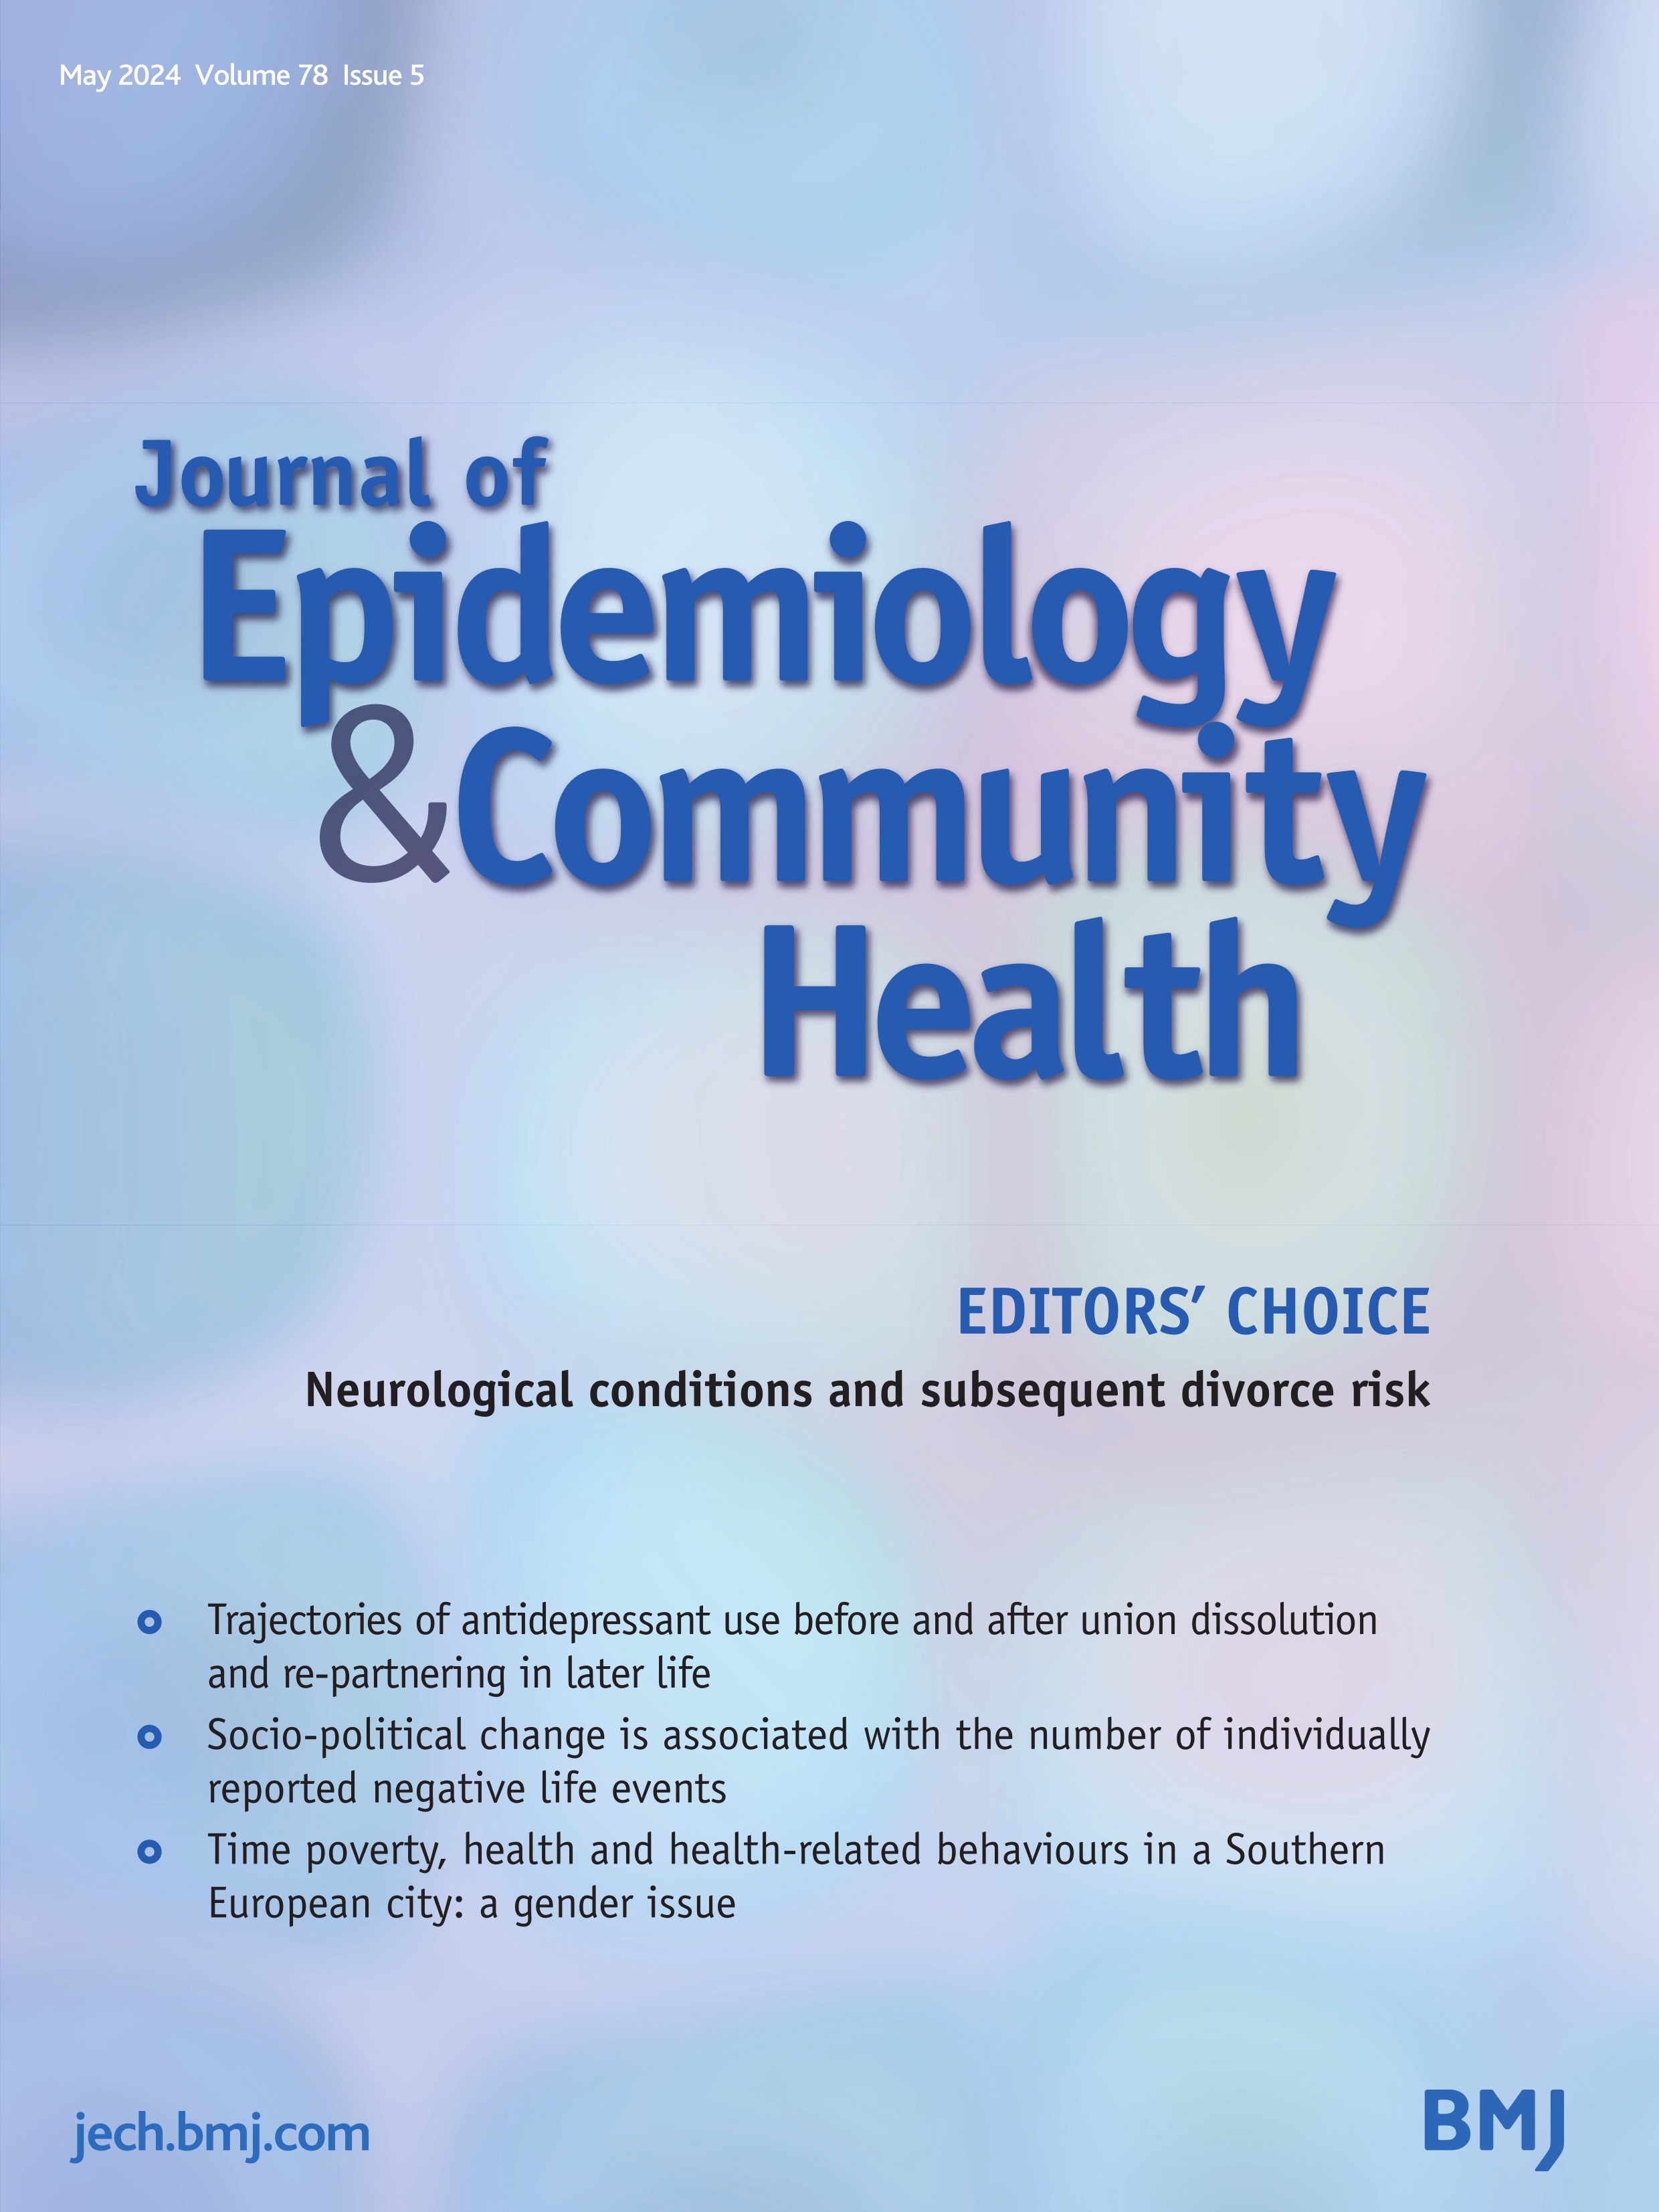 Assessment of census-tract level socioeconomic position as a modifier of the relationship between short-term PM2.5 exposure and cardiovascular emergency department visits in Missouri